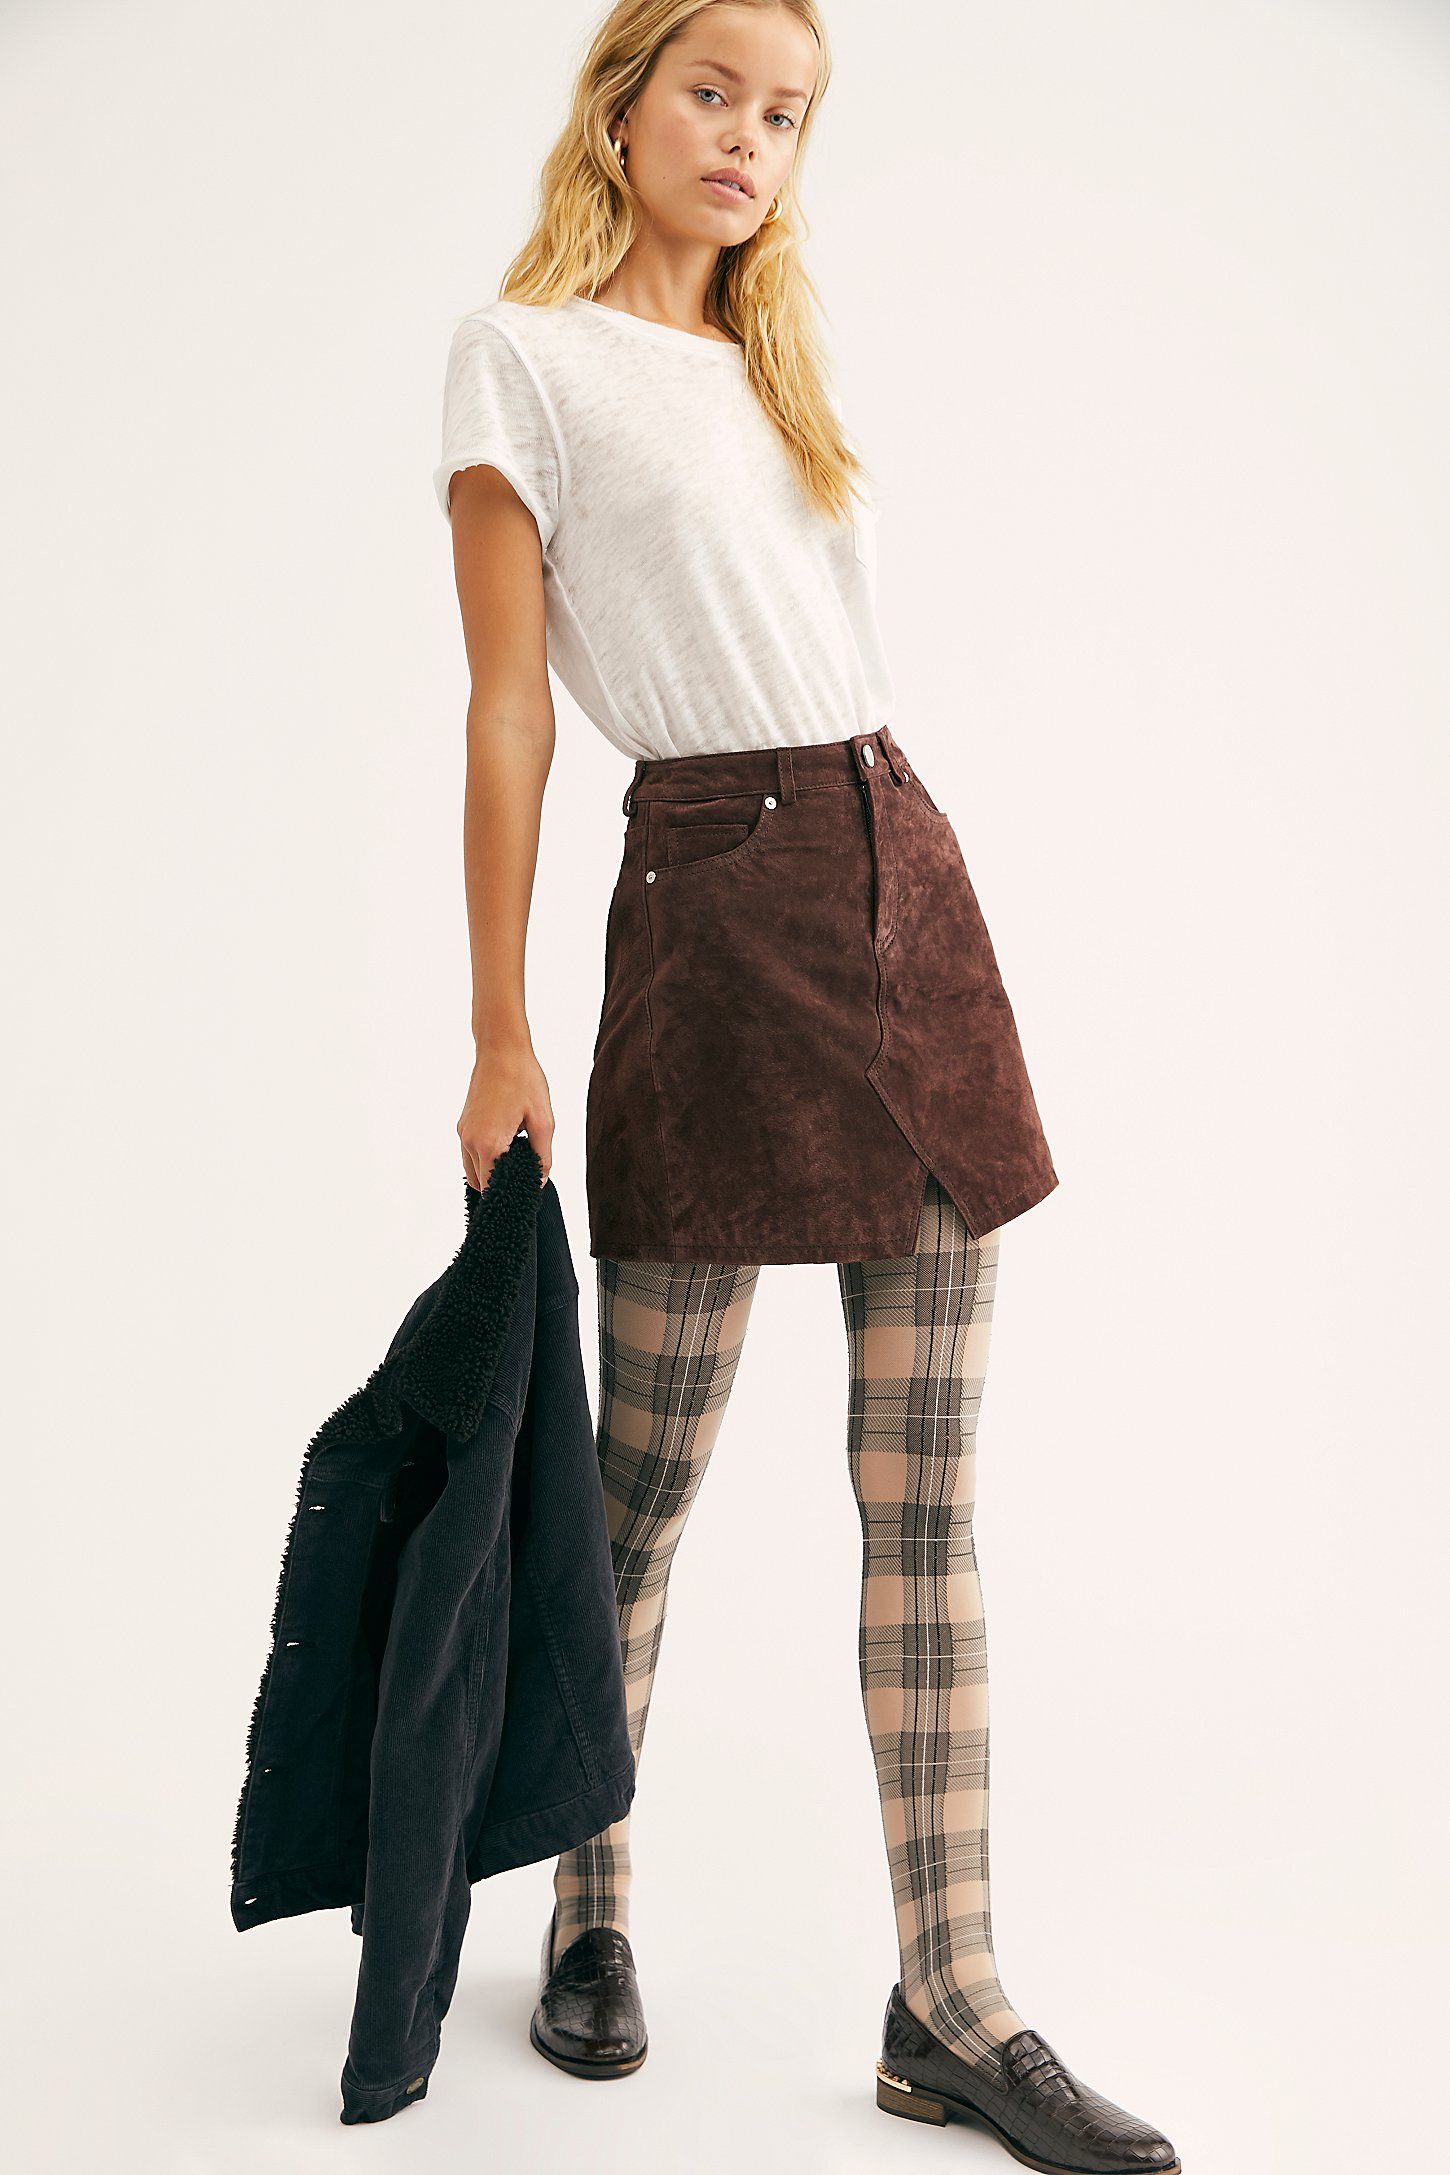 winter skirts with tights